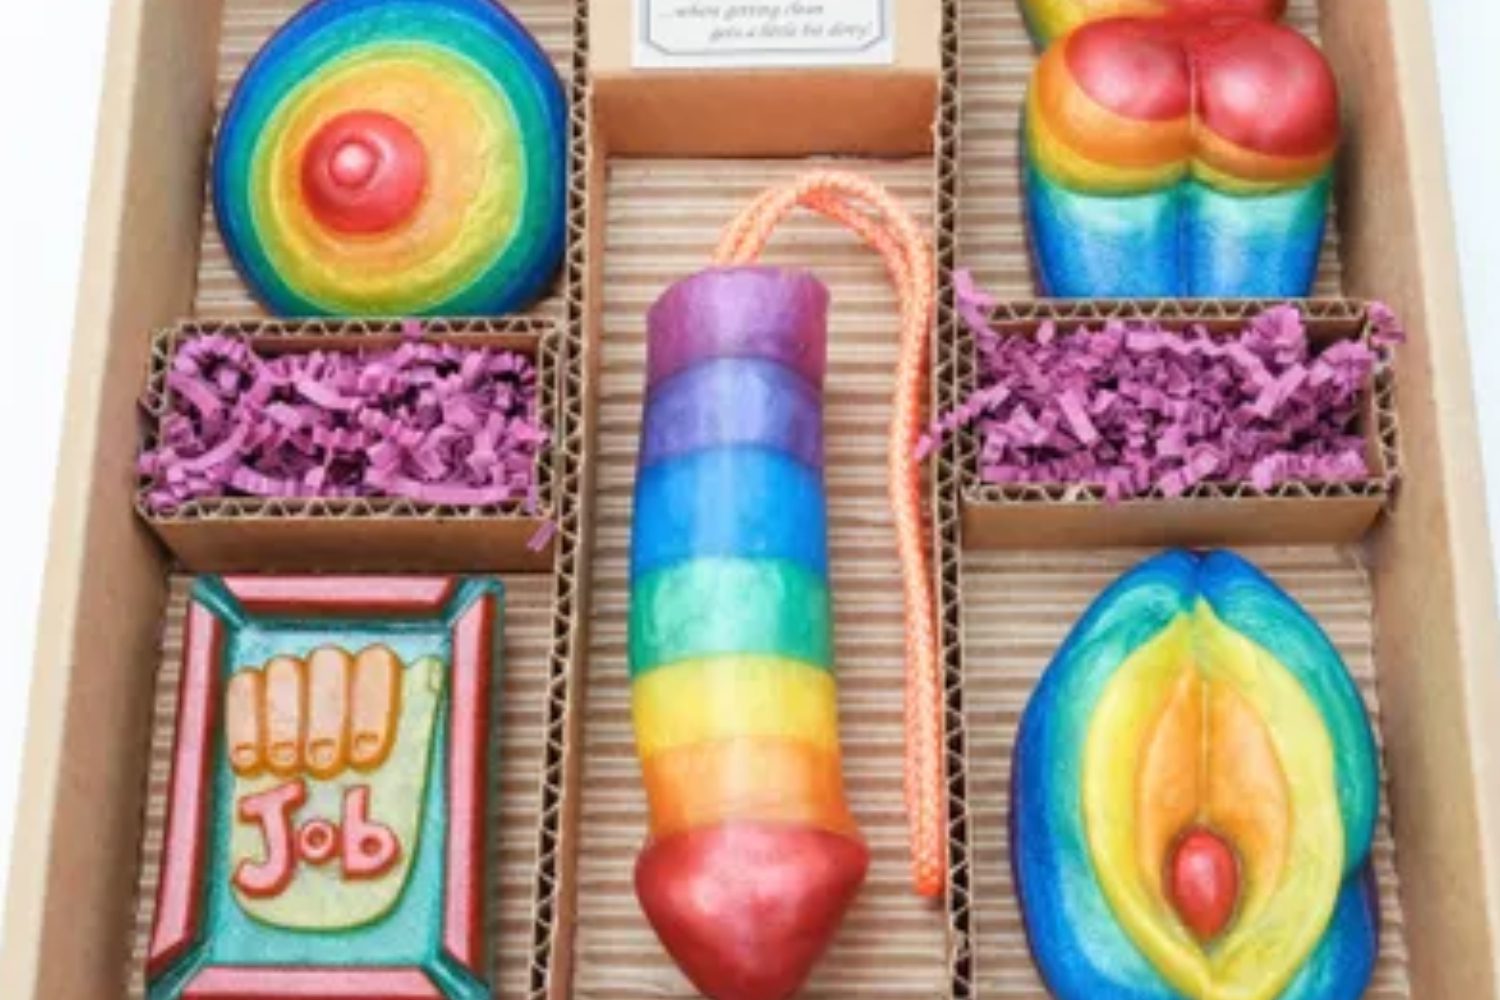 A box of colorful cookies with a rainbow design.